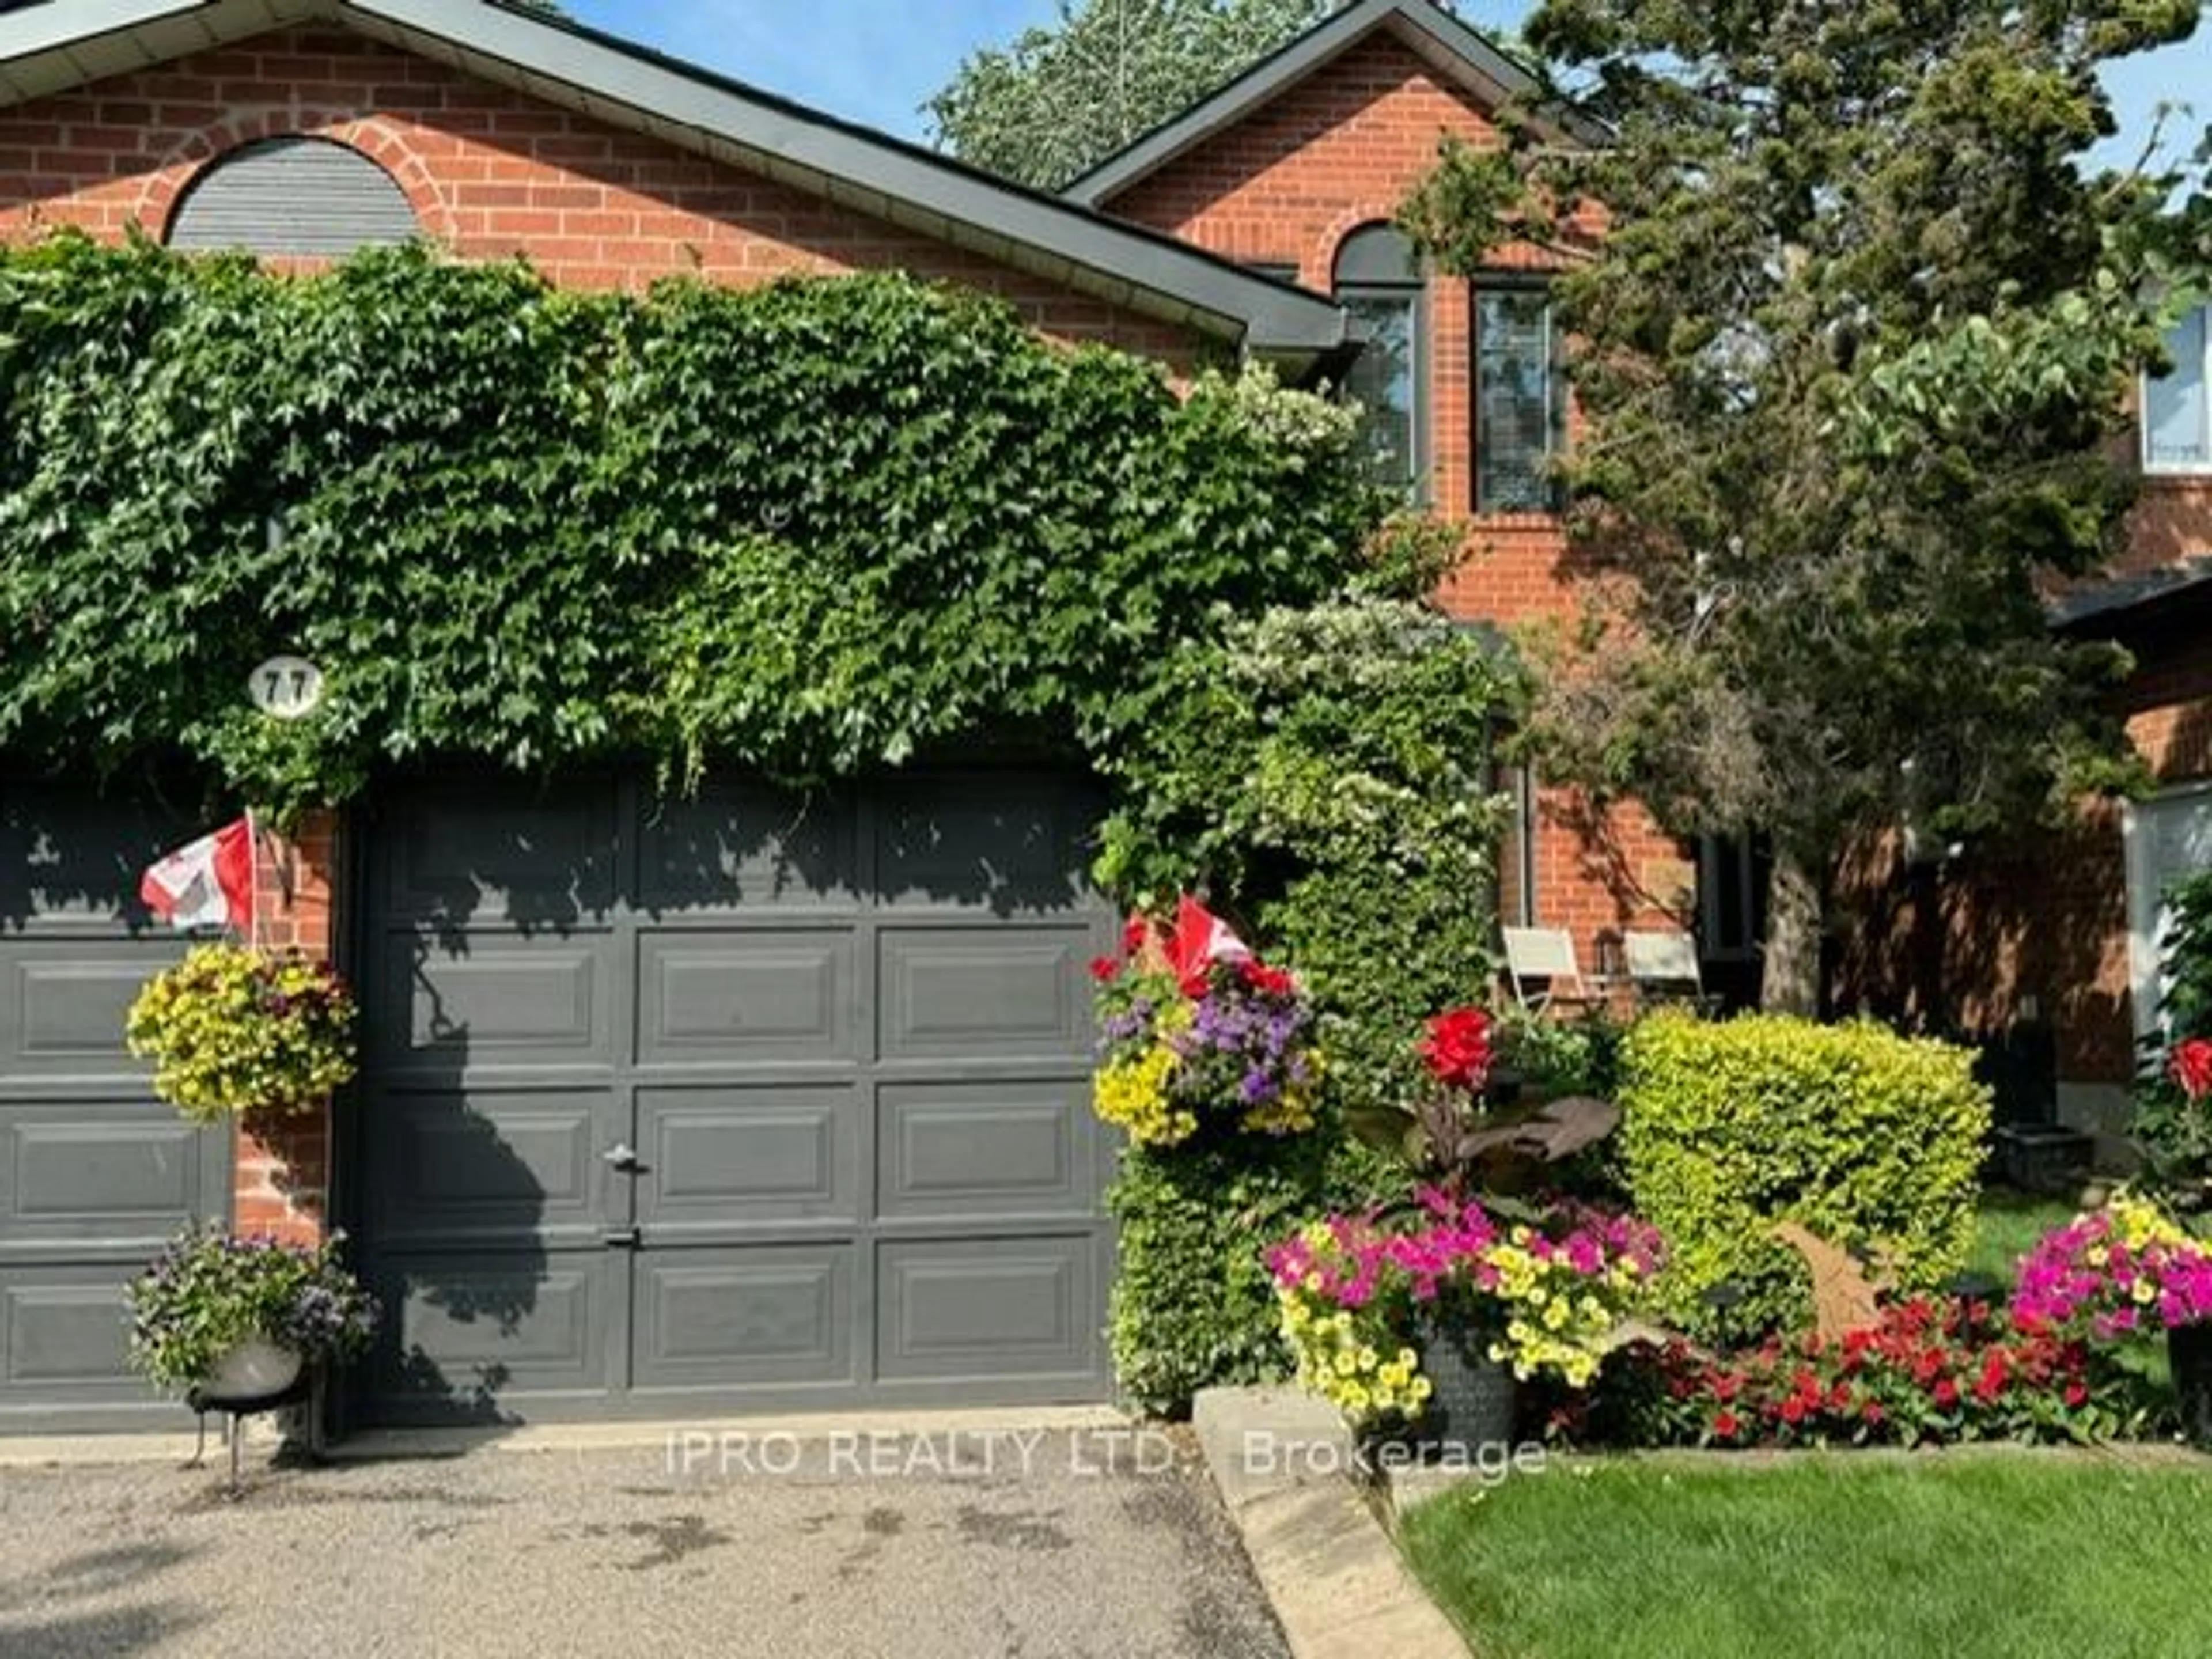 Home with brick exterior material for 77 Lord Simcoe Dr, Brampton Ontario L6S 5H1